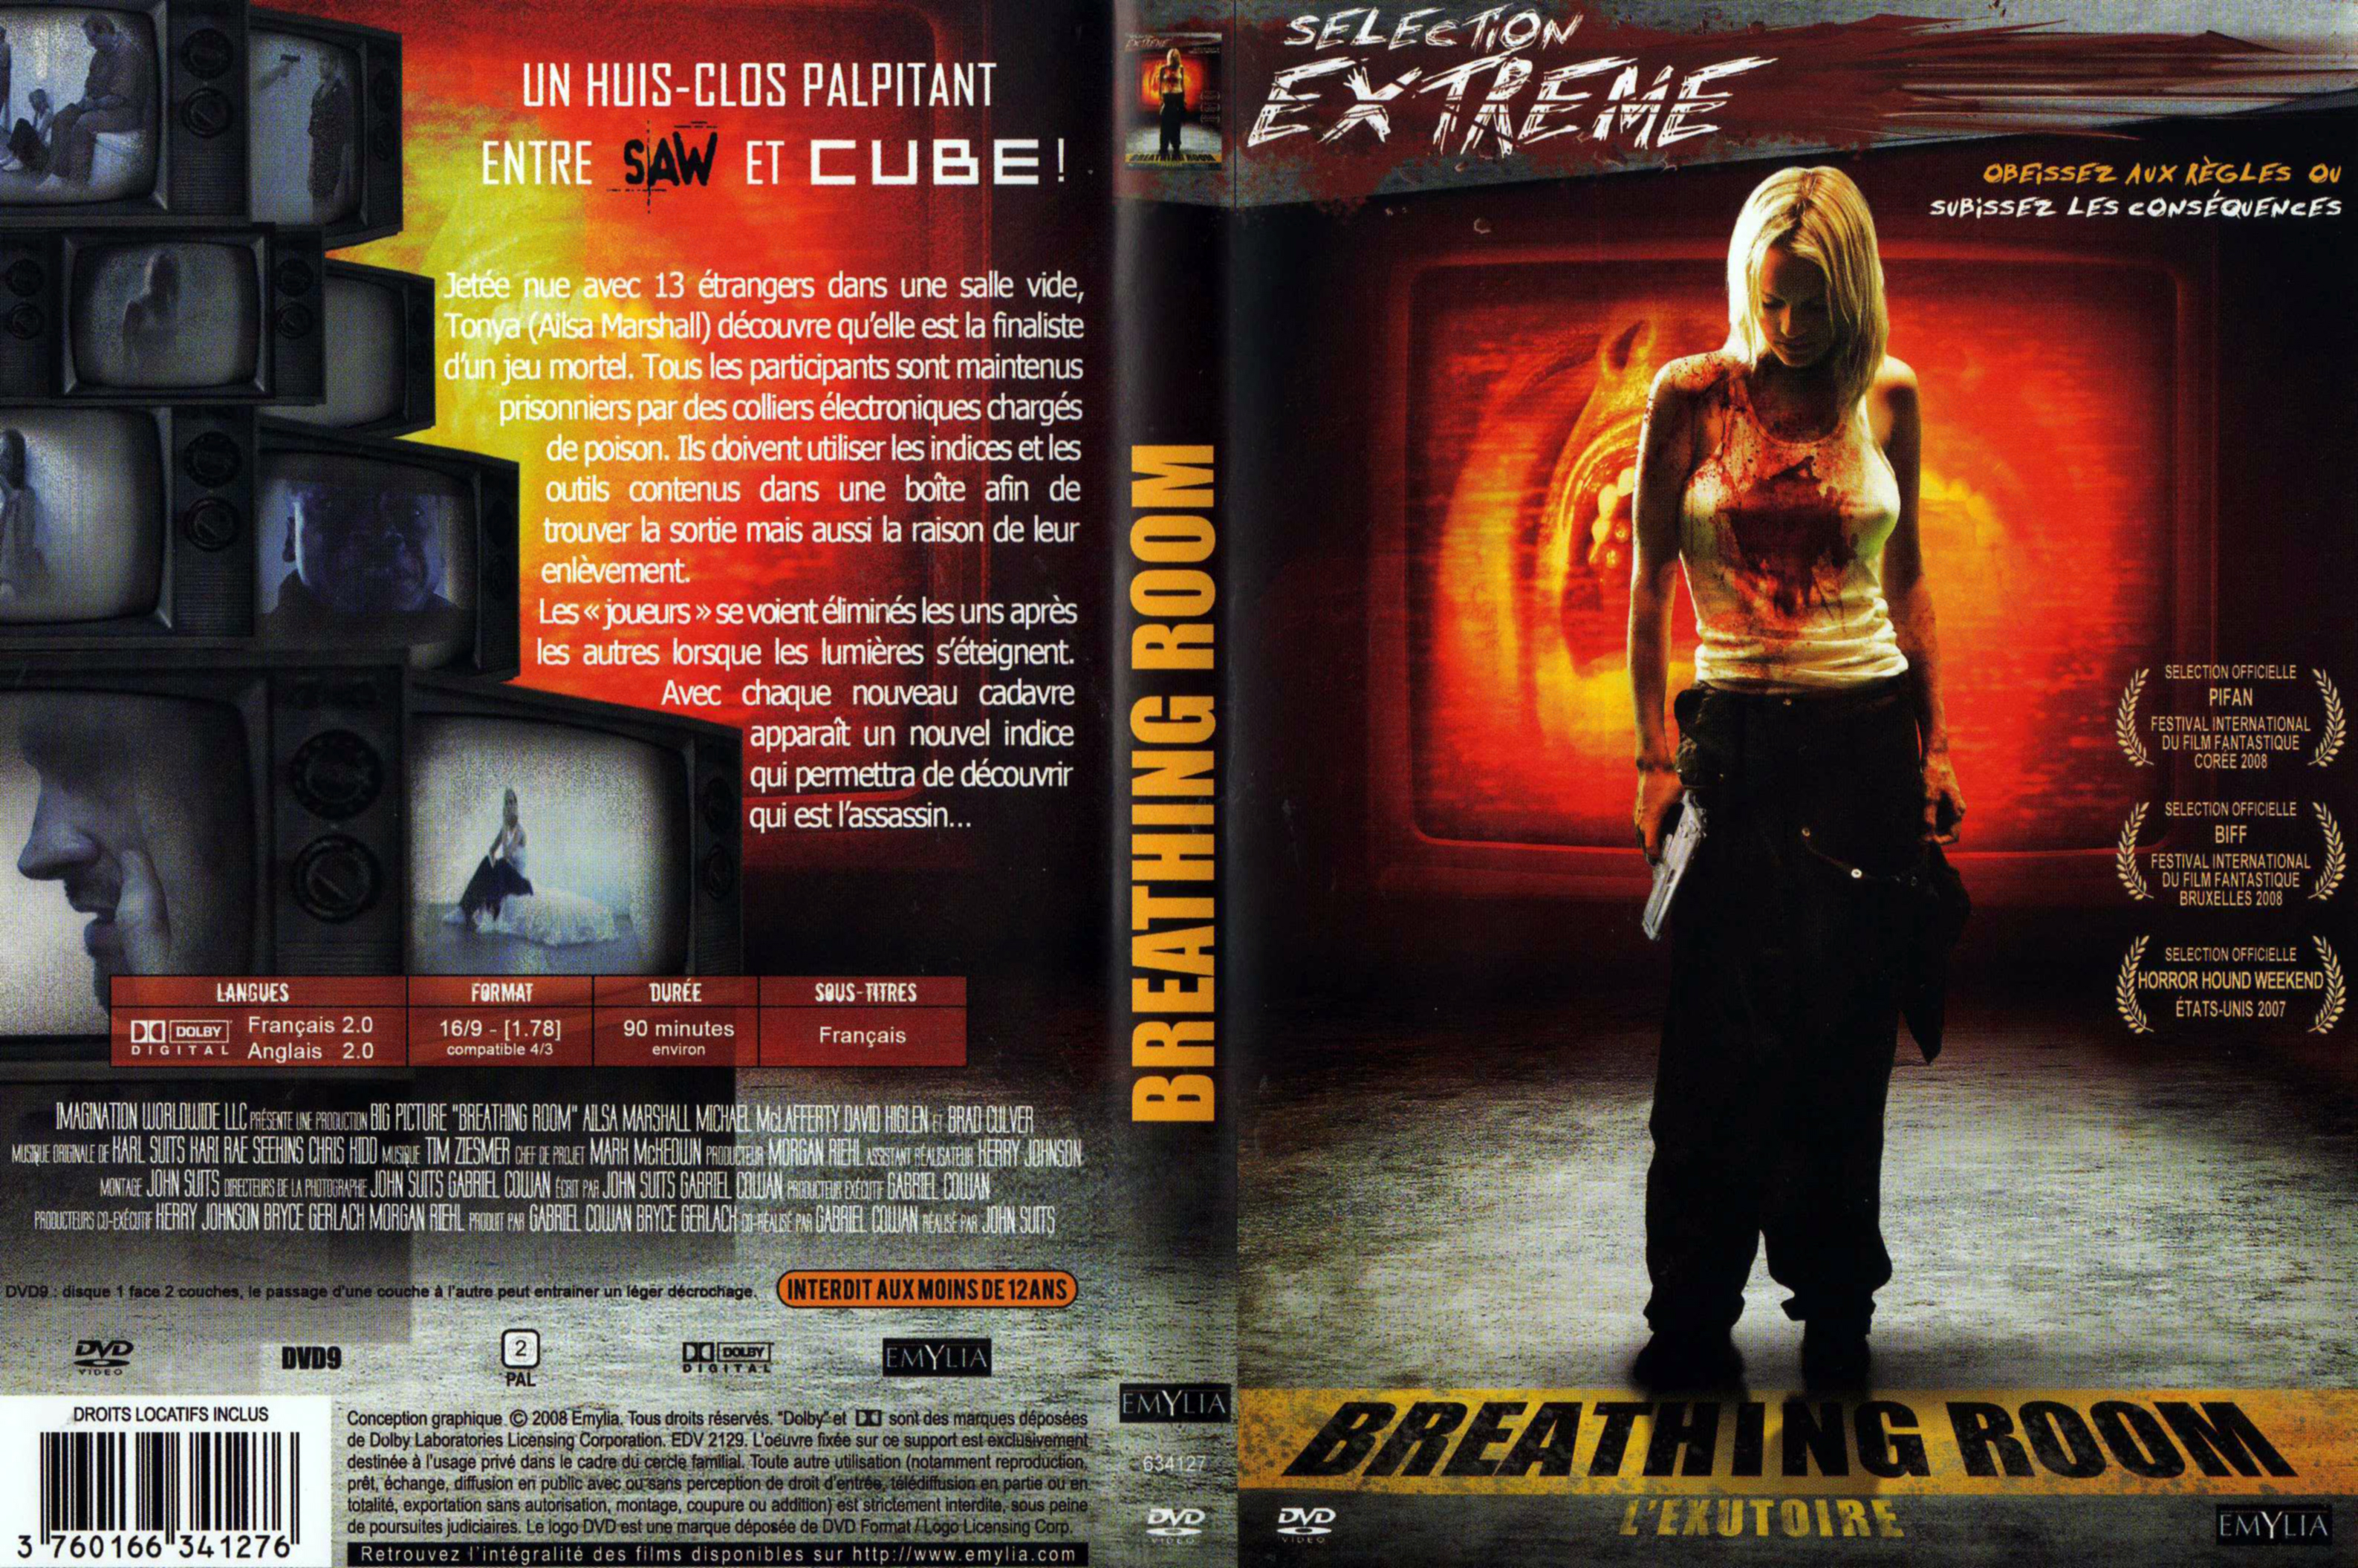 Jaquette DVD Breathing room